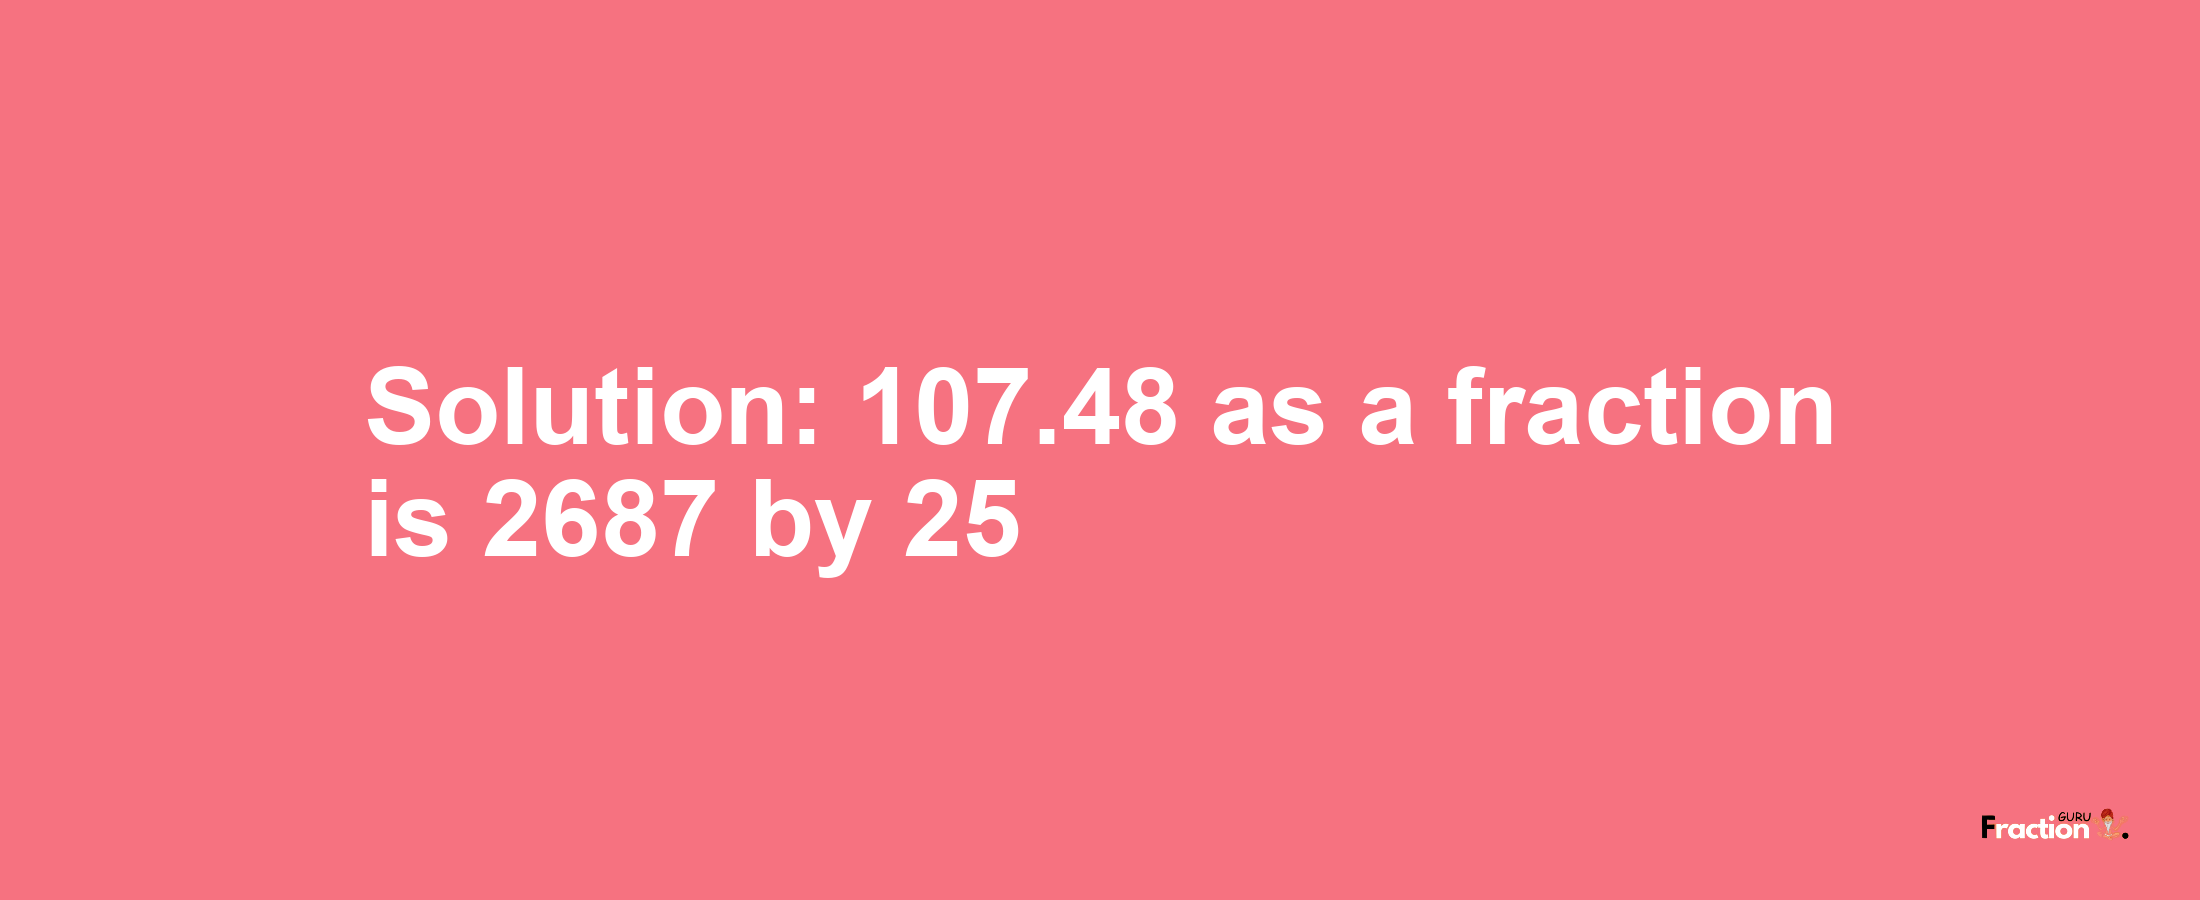 Solution:107.48 as a fraction is 2687/25